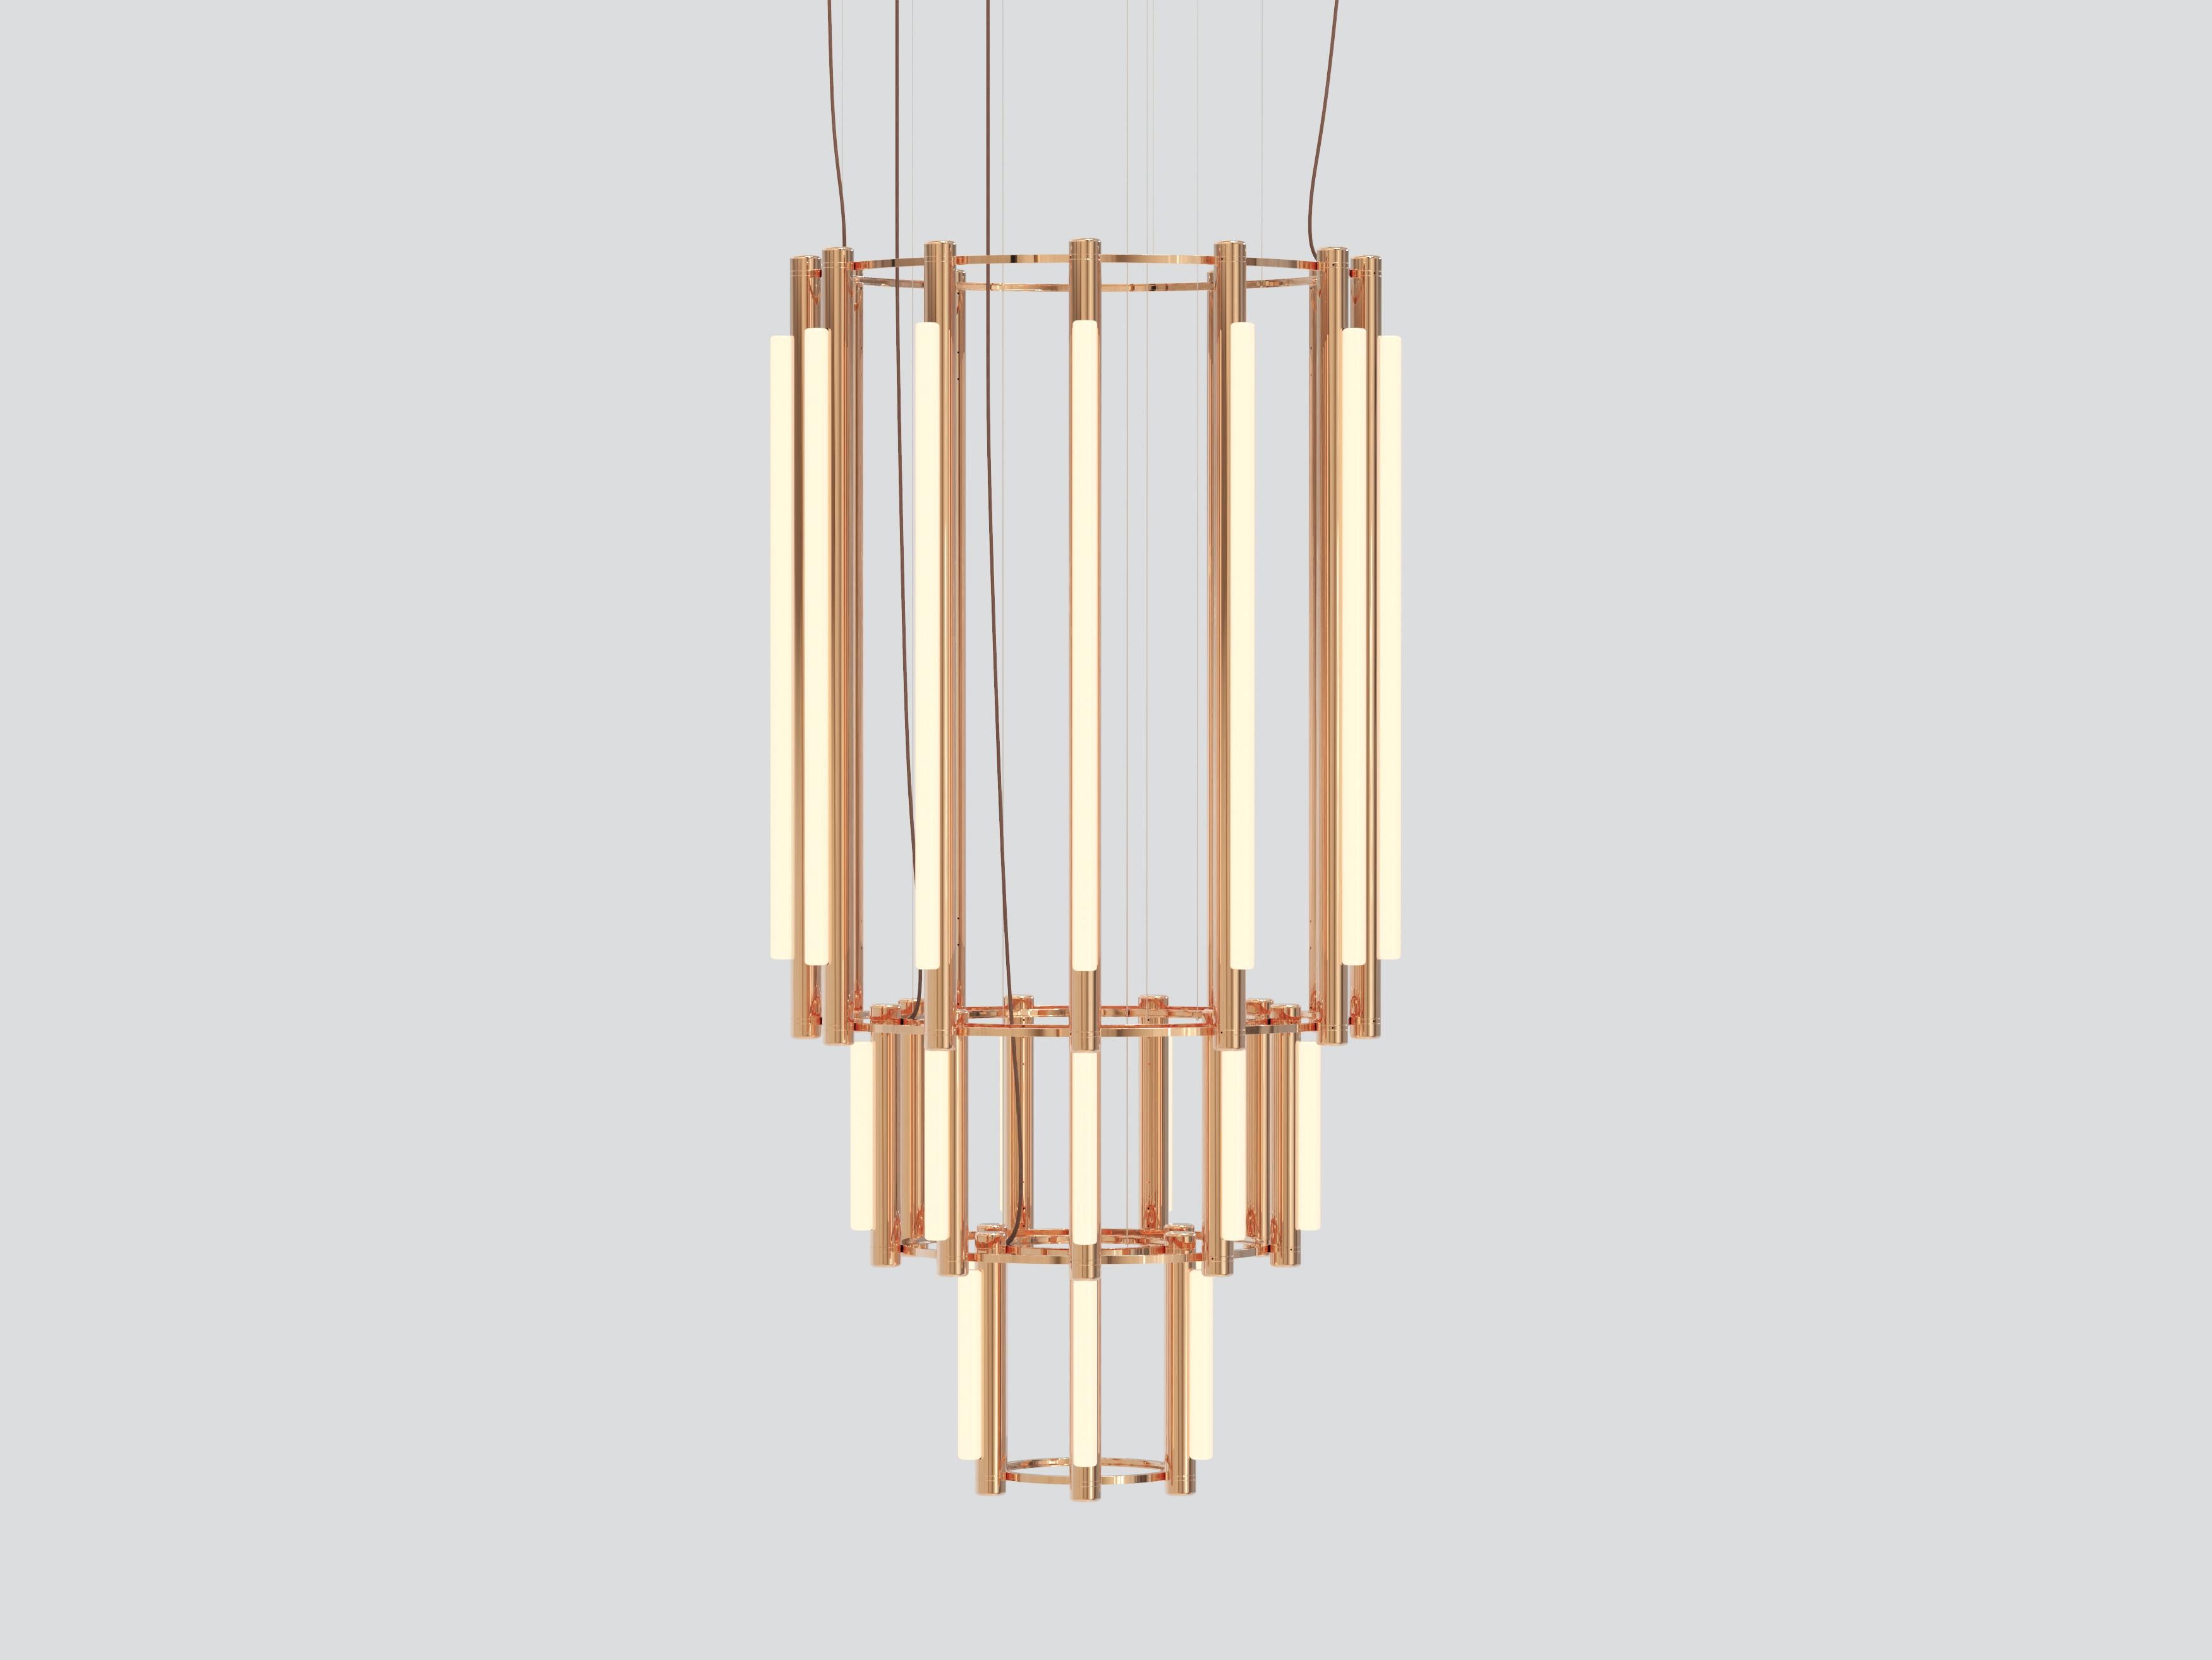 PIPELINE CHANDELIER 11 – PENDANT
by CAINE HEINTZMAN 

MATERIALS
– Aluminum Body
– Cast Acrylic

ELECTRICAL
– 12 x 15W + 15 x 5W LED
– 47,000 hour Lifetime
– 90+ CRI
– Input Voltage 100–240V + 277V
– Integral 24V DC power supply included